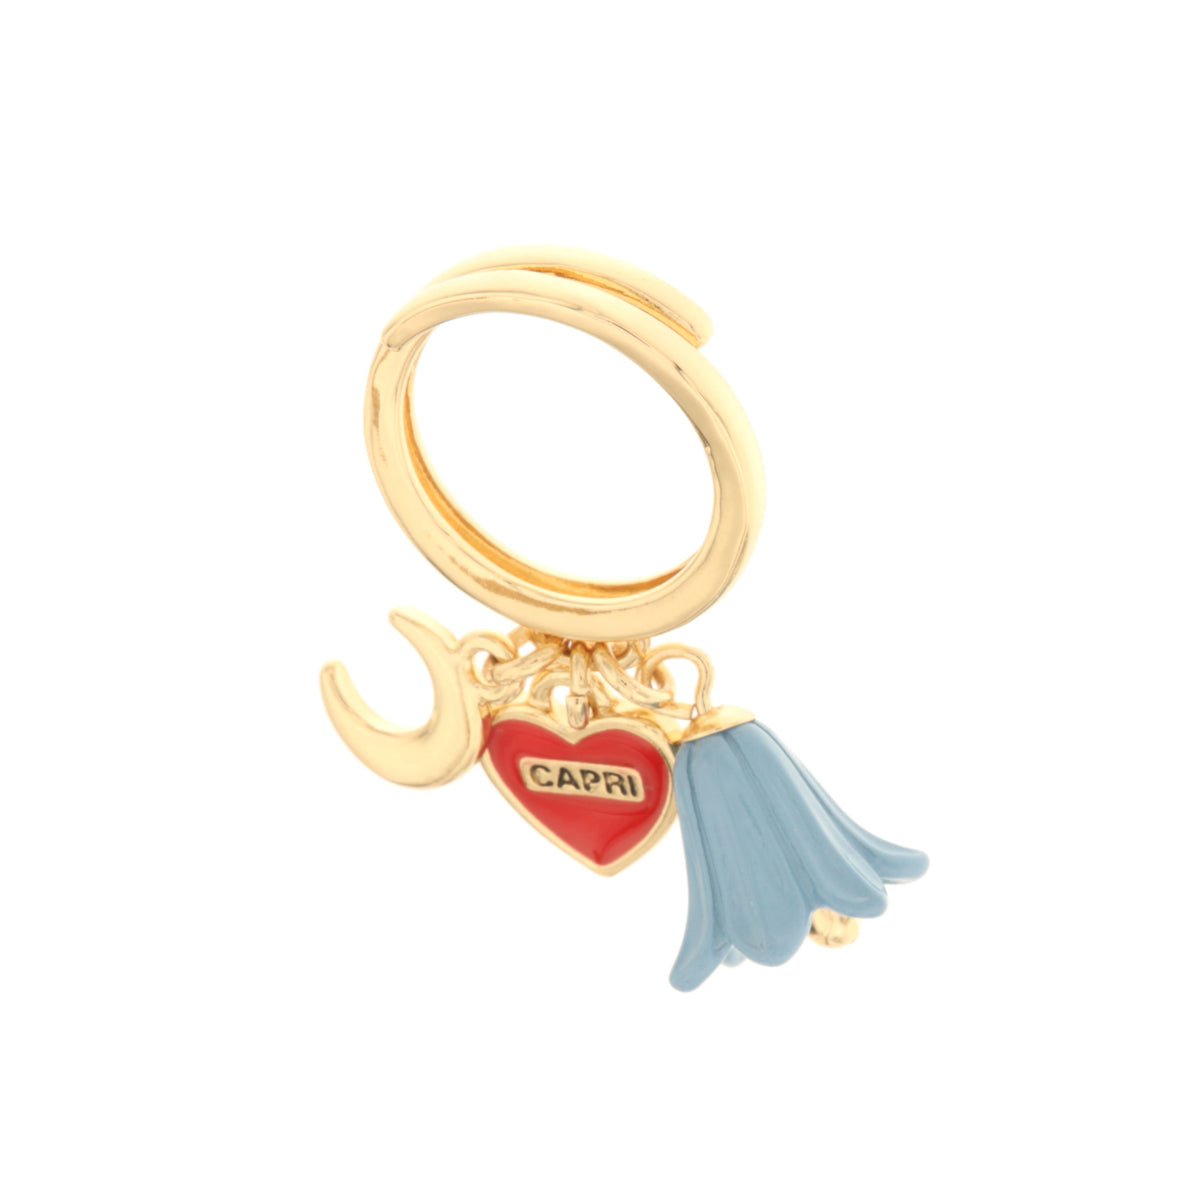 Metal ring with Luna pendants, heart with goats and bell -shaped bell